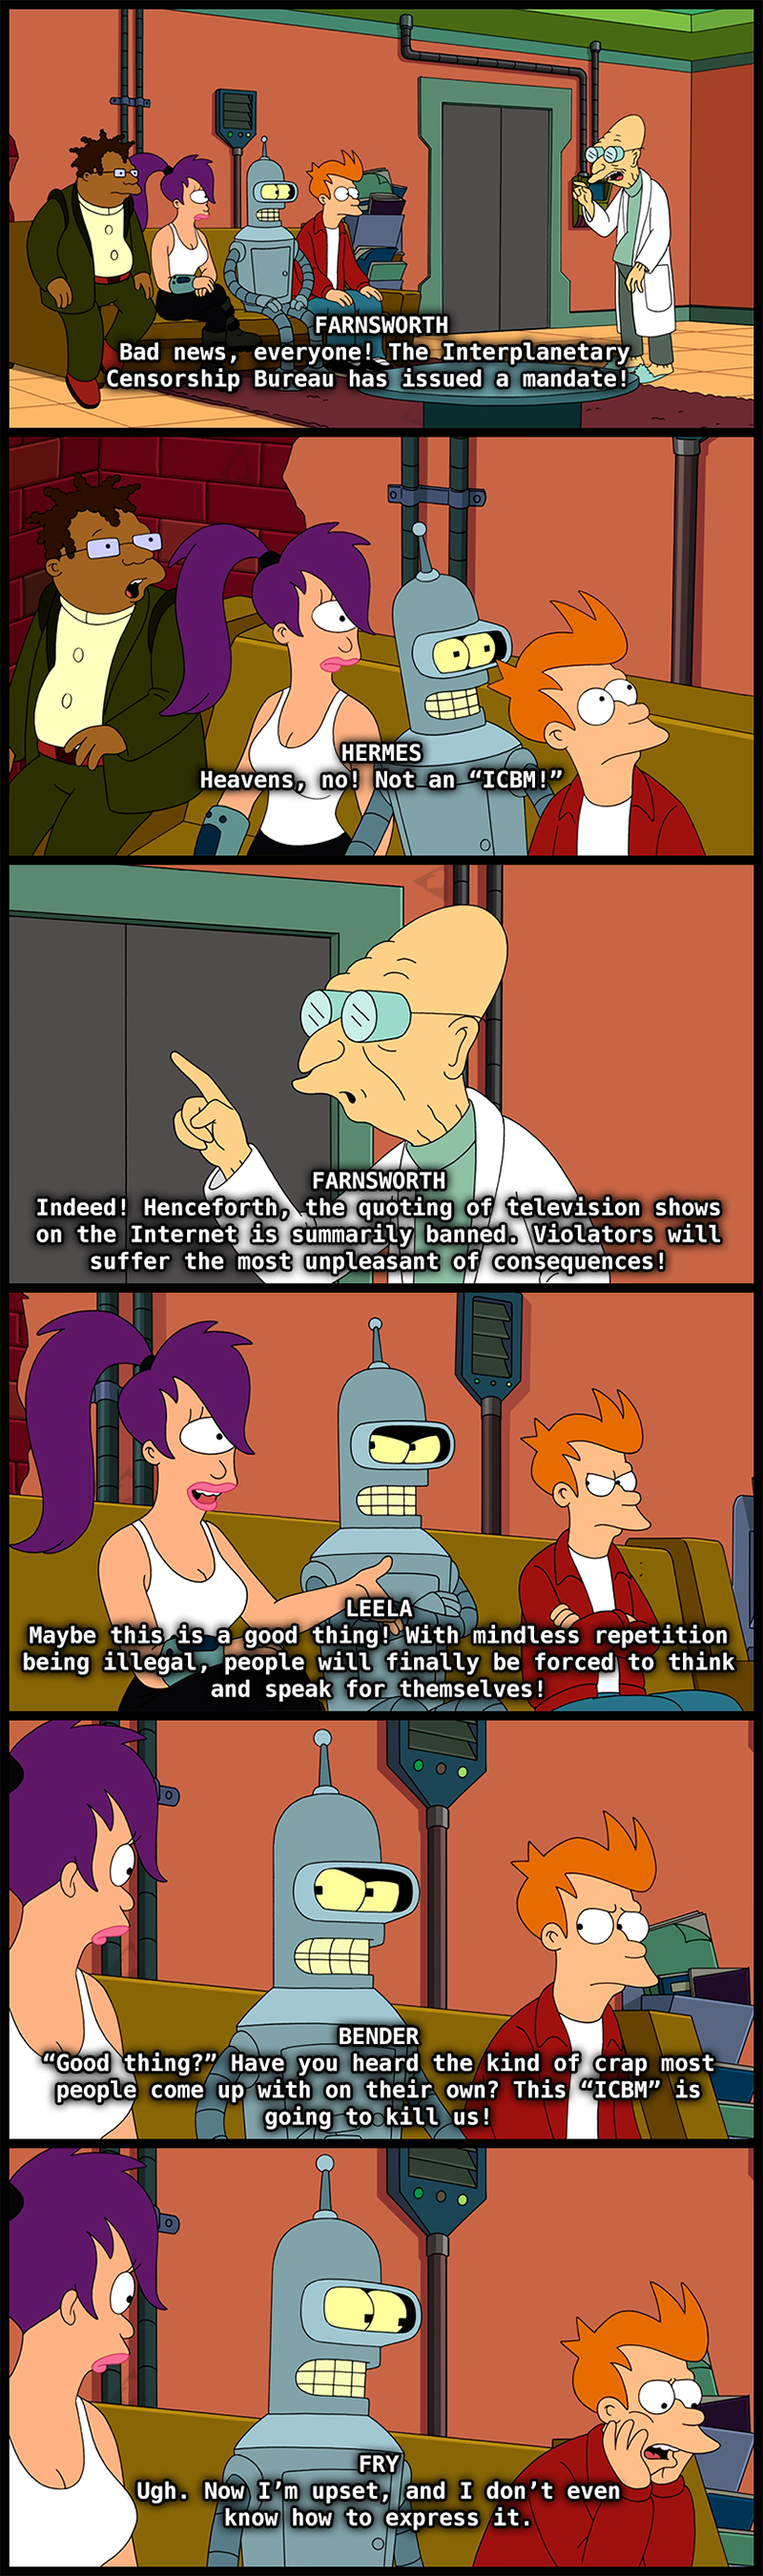 I agree with Fry.